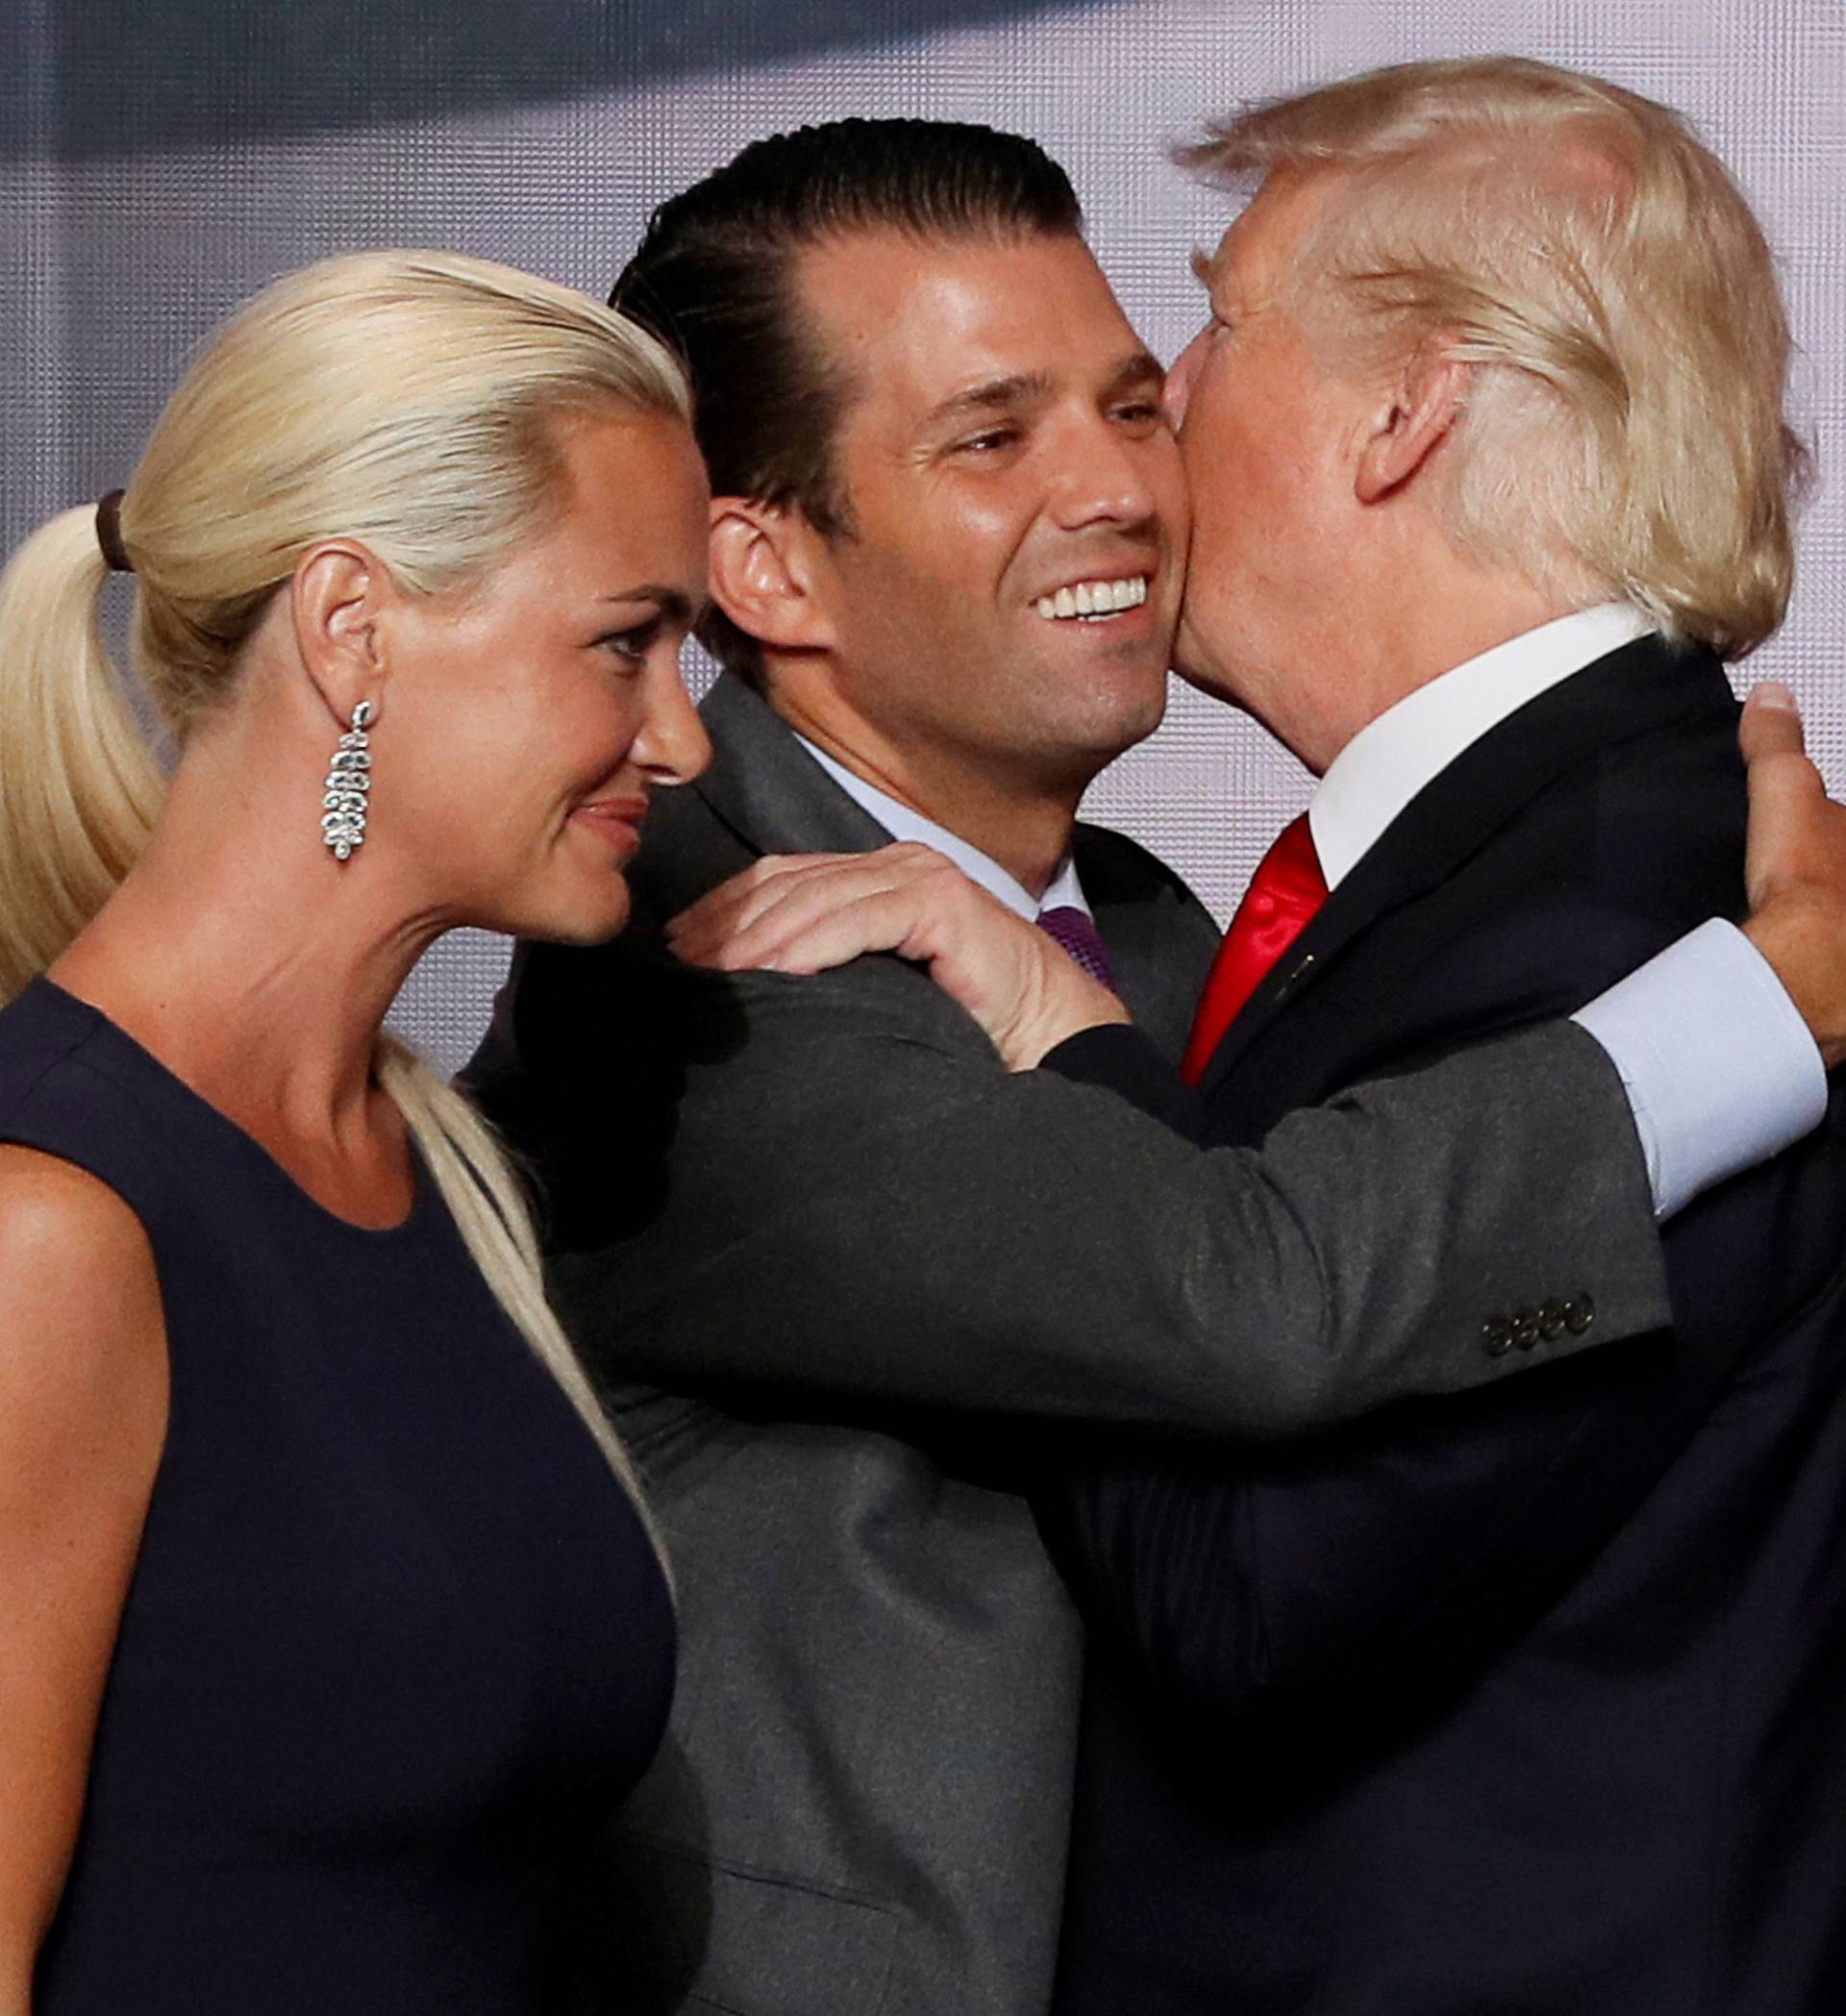 FILE PHOTO: Donald Trump Jr. hugs his father as his wife Vanessa walks past at 2016 Republican National Convention in Cleveland